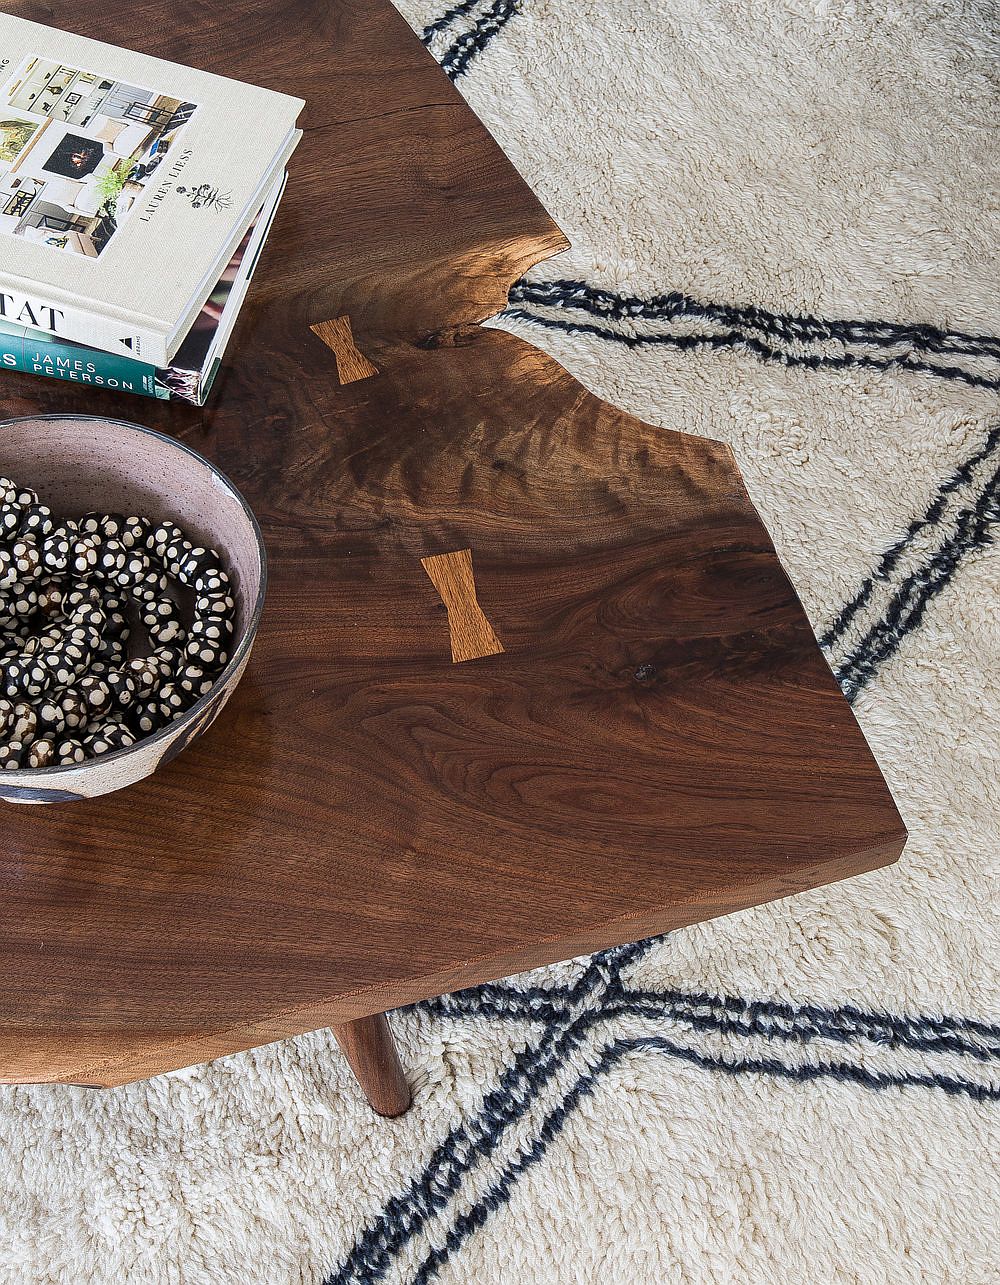 Exquisite live-edge coffee table for modern living room